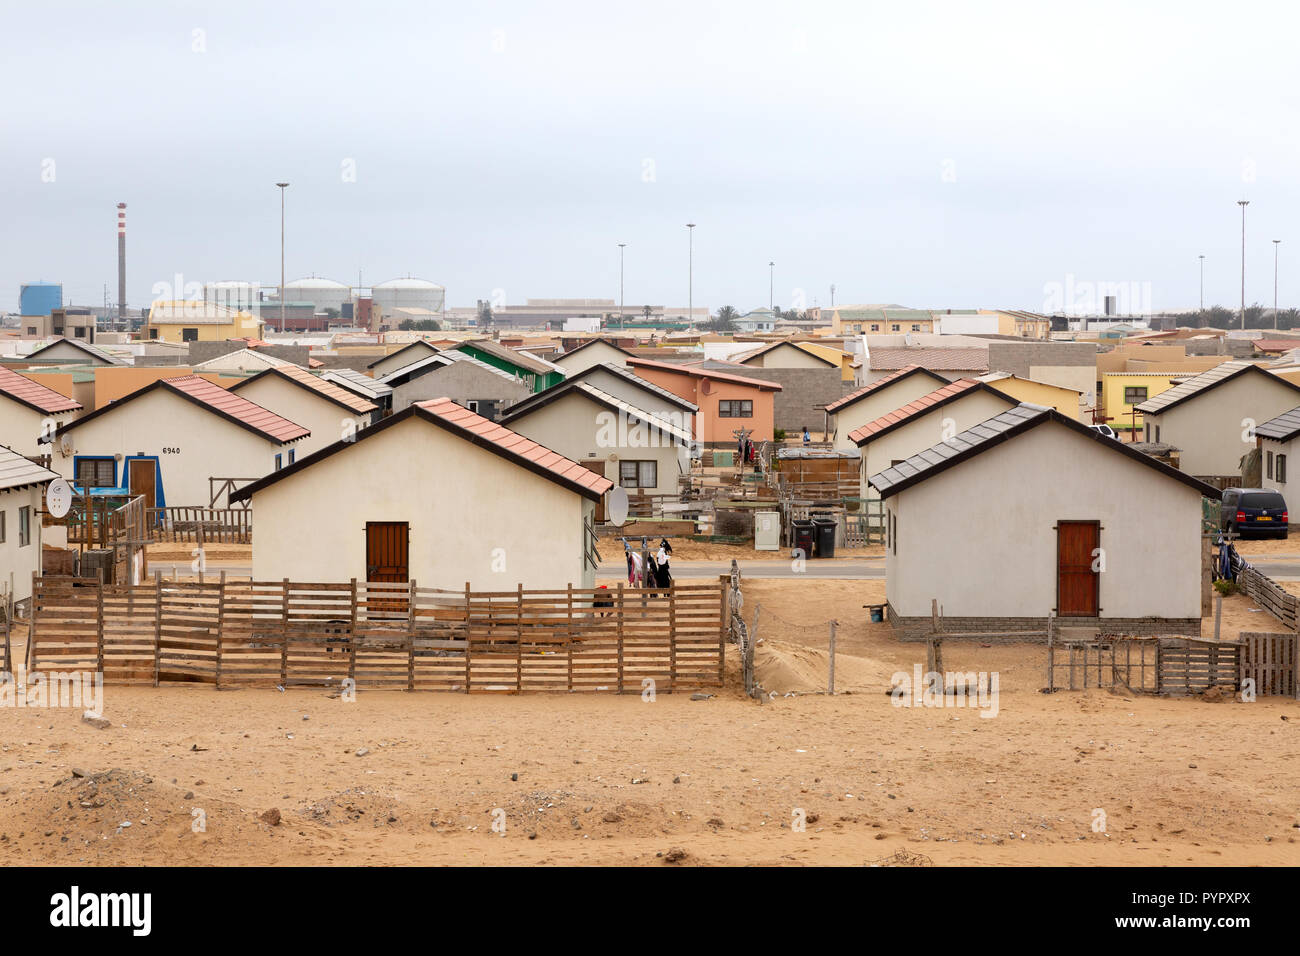 Namibia houses - Housing in the town of Walvis Bay, Namibia, Africa Stock Photo